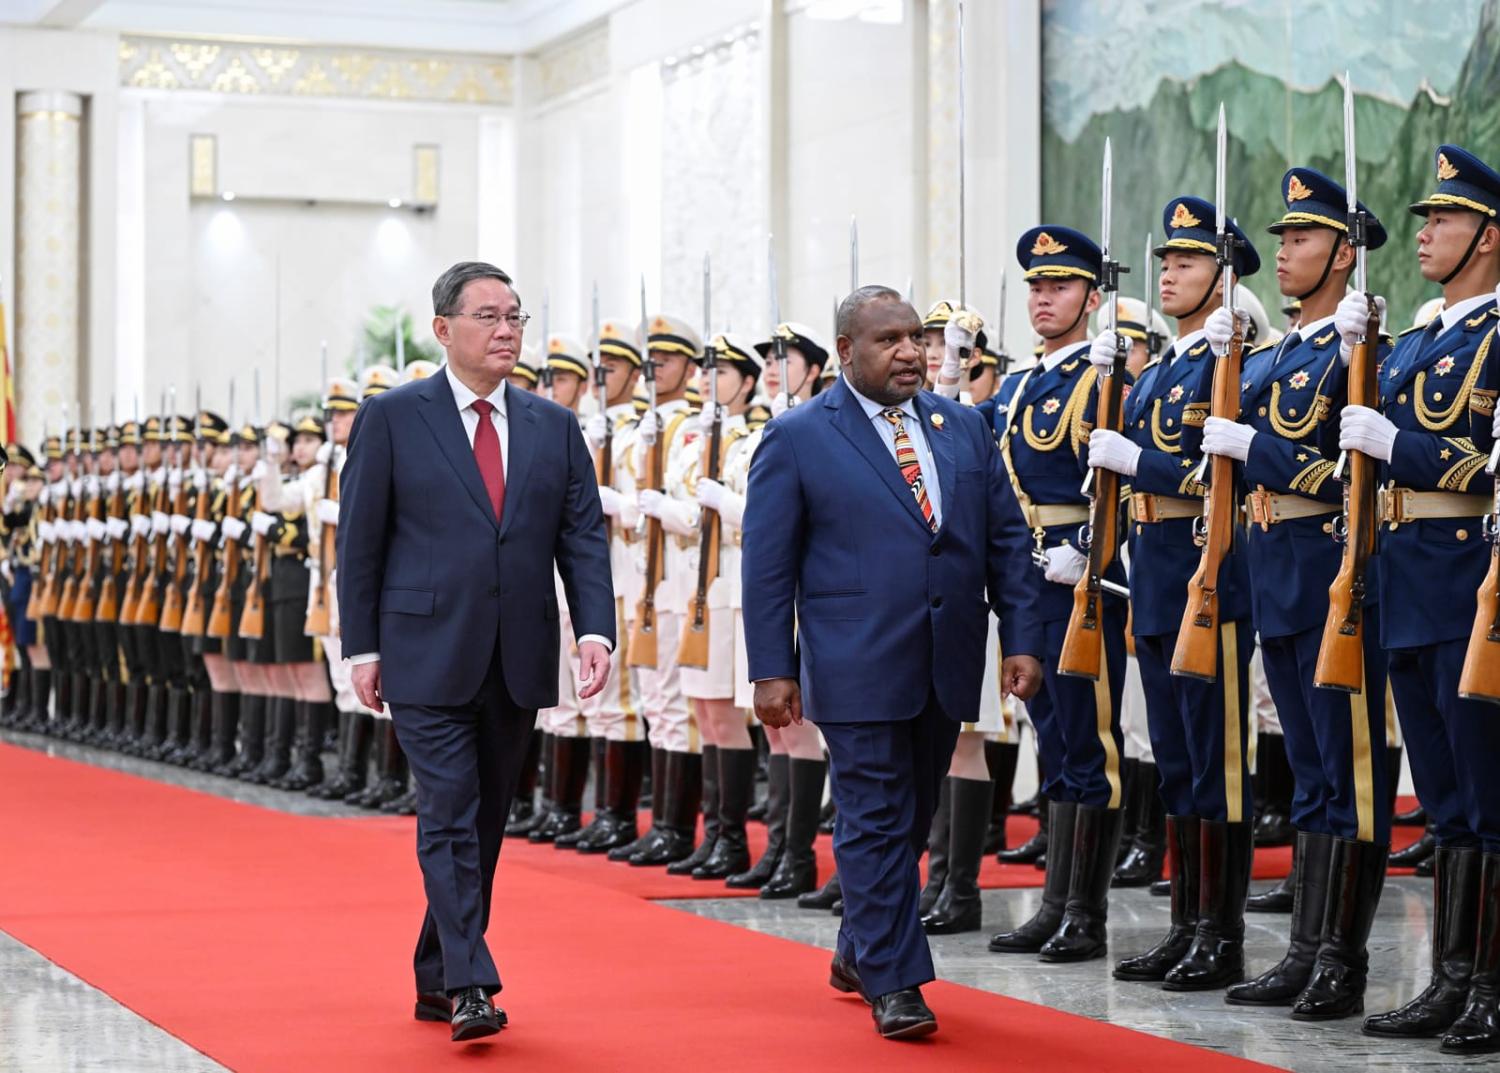 Chinese Premier Li Qiang holds a welcoming ceremony in October last year for PNG Prime Minister James Marape in the Great Hall of the People, Beijing (Zhang Ling/Xinhua via Getty Images)